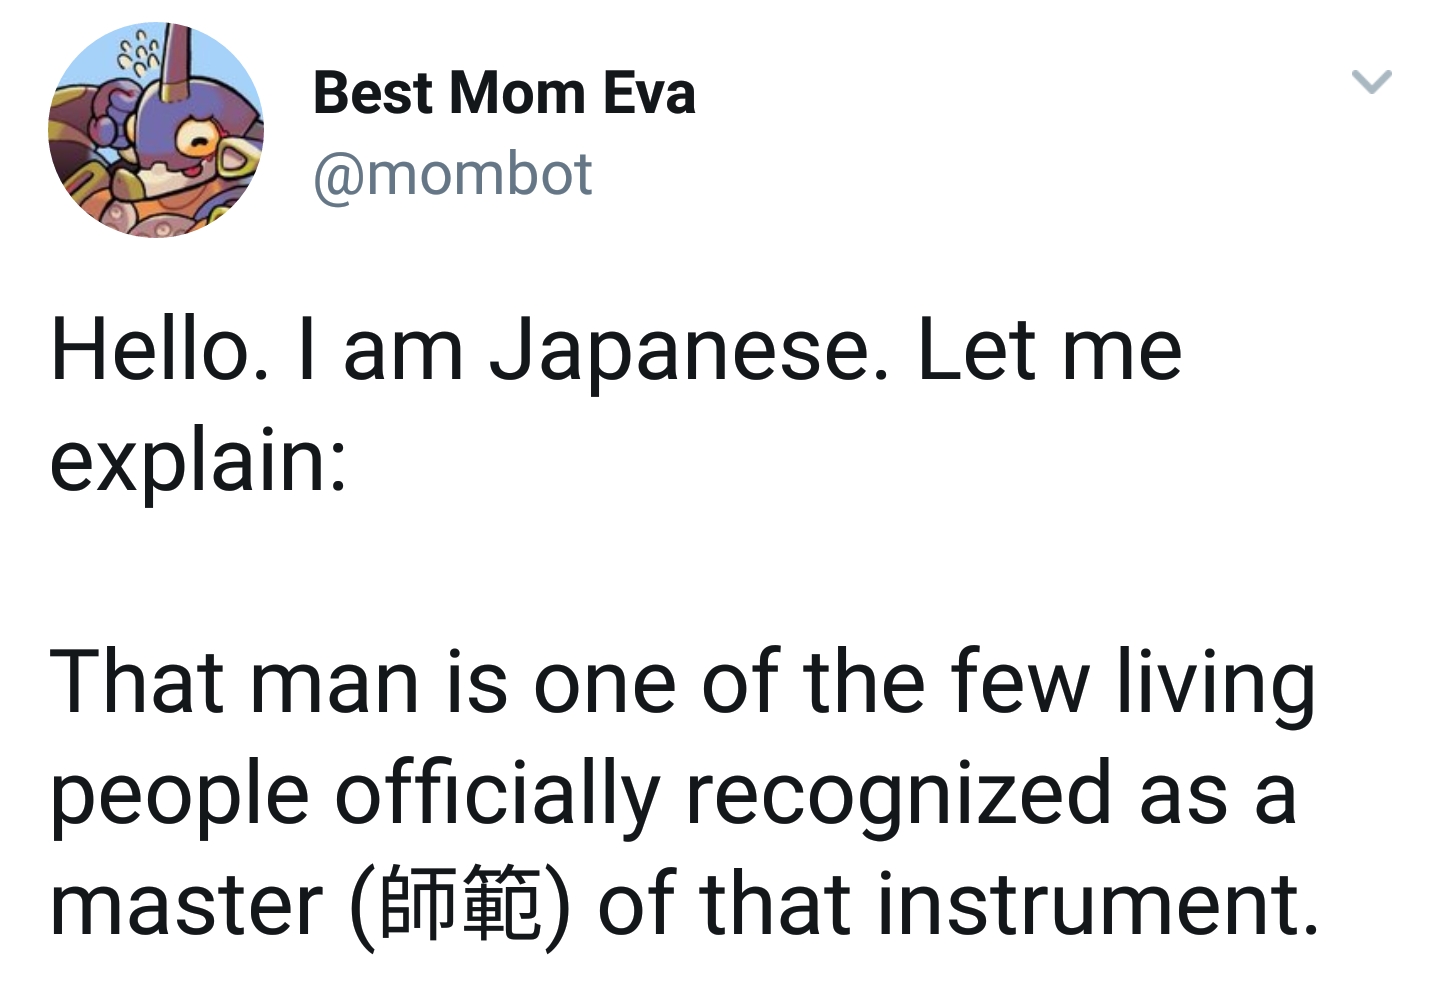 @mombot Best Mom Eva is Japanese and explains politely that he is a master of this instrument and respected greatly in Japan for knowing that instrument so well